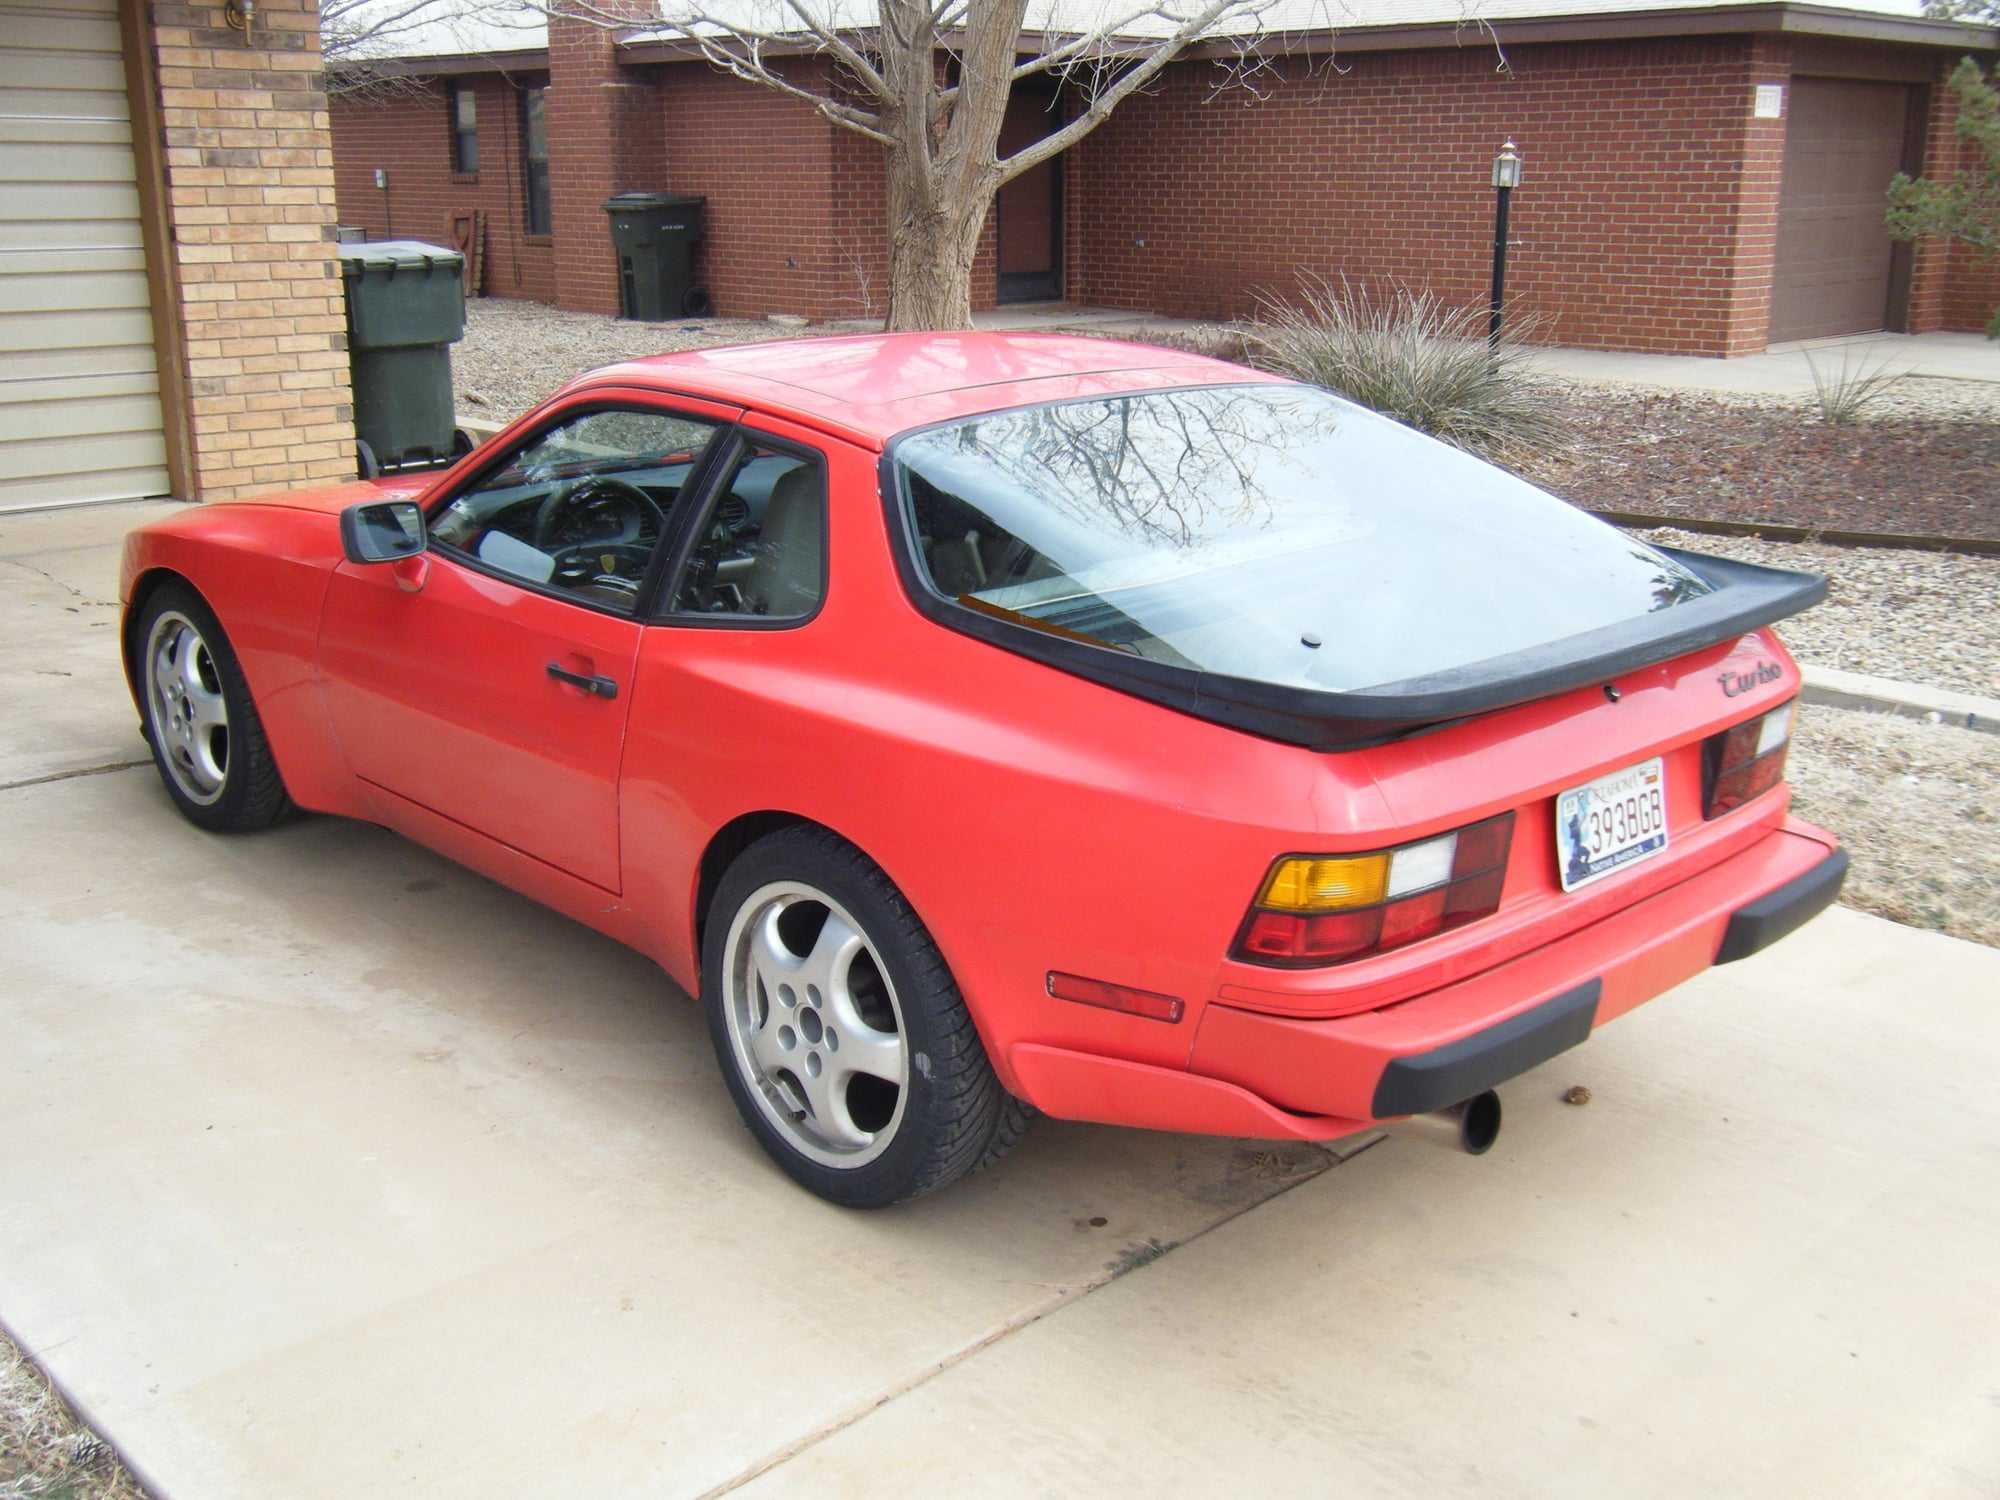 1986 Porsche 944 - Great 944 Turbo, needs a good home - Used - VIN WP0AA0950GN152485 - 151,600 Miles - 4 cyl - 2WD - Manual - Coupe - Red - North Little Rock, AR 72114, United States